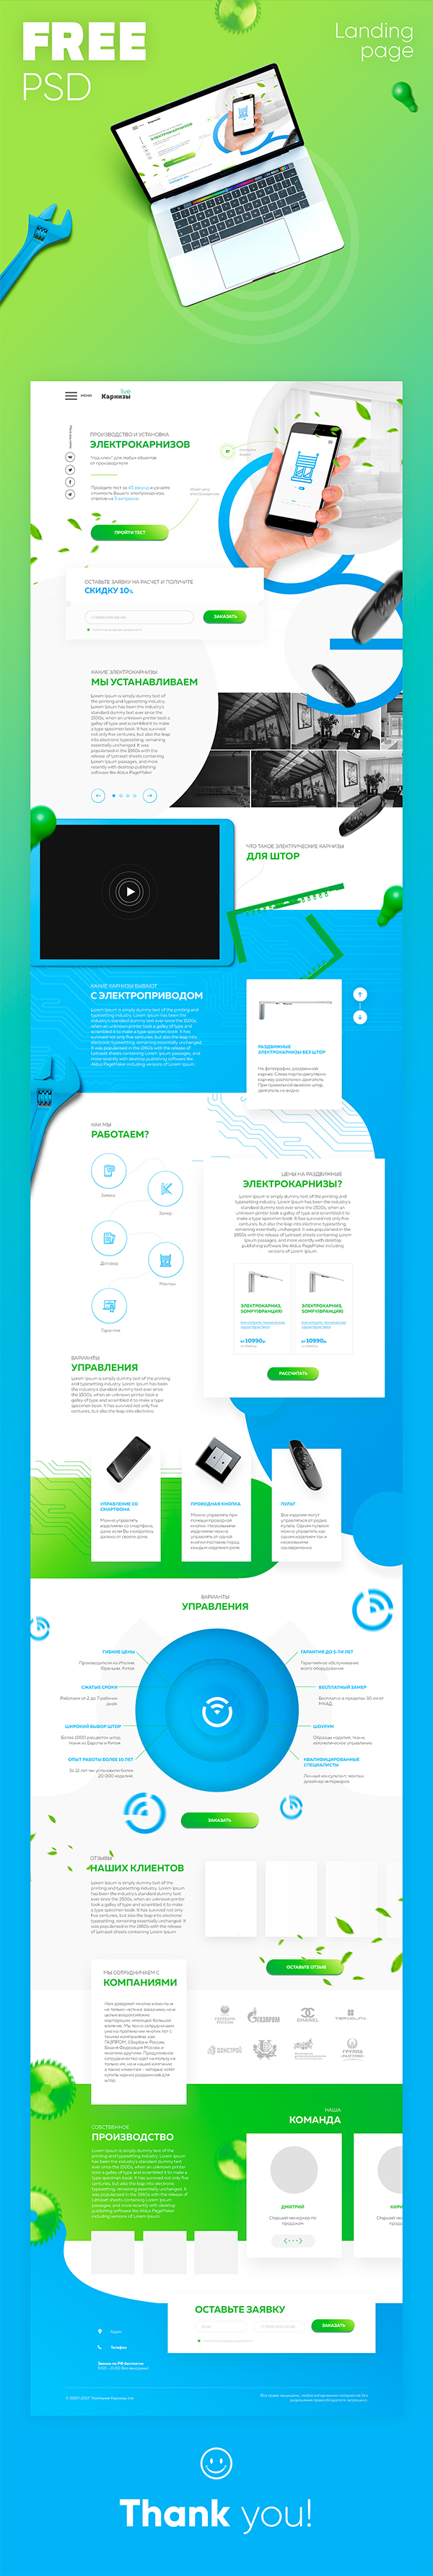 Free Download Awesome Landing Page Template (PSD)